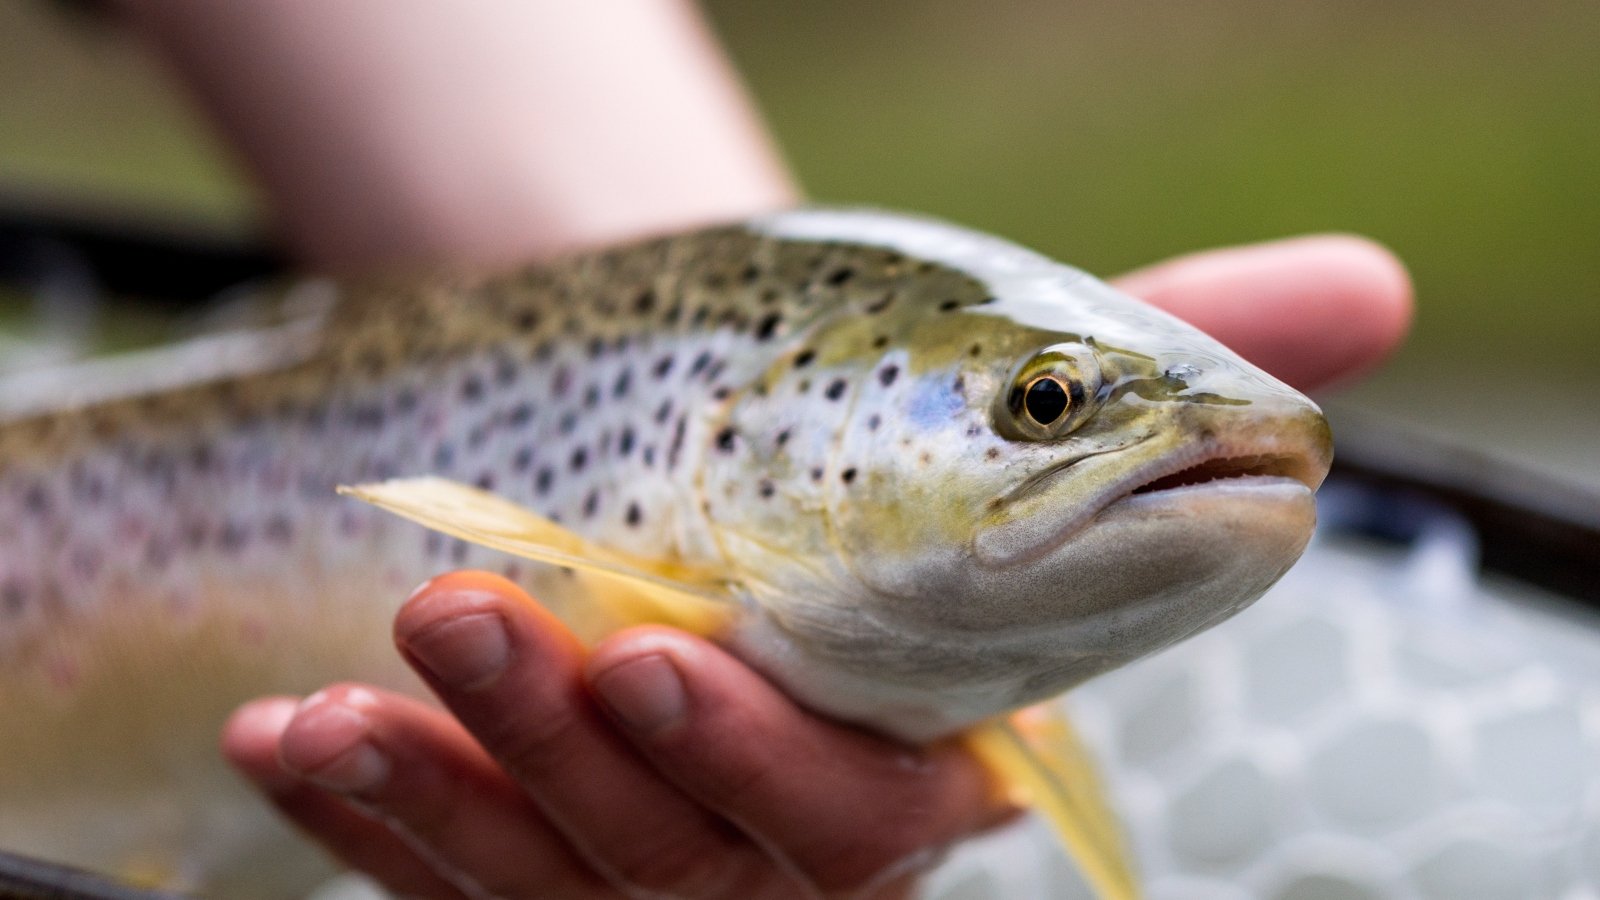 Close up of a trout in a net held in a hand